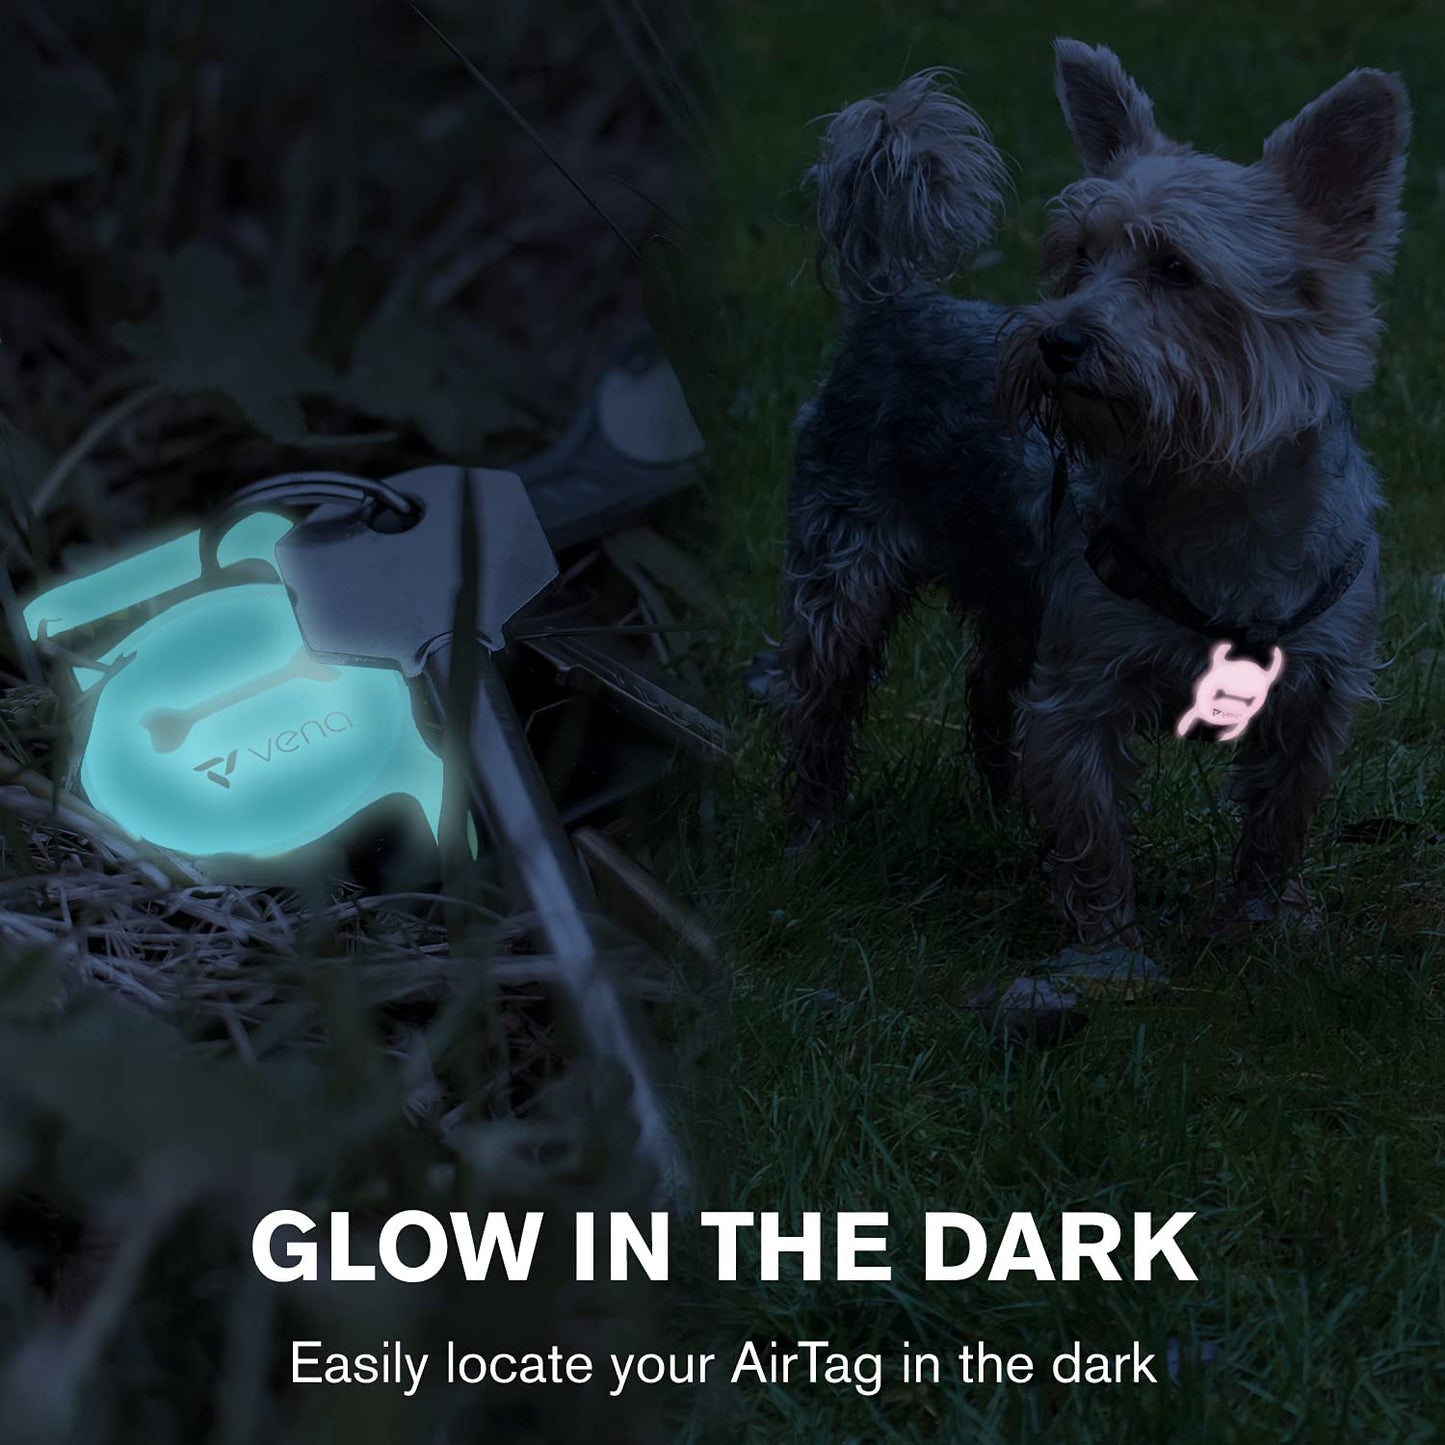 Vena Glow in the Dark Anti-Scratch Silicone Case Compatible with Apple Airtag for Dog Cat Pet Collar (2 Packs), Protective Airtag GPS Holder for Pet Loop Collar and Backpack (Light Blue / Pink)